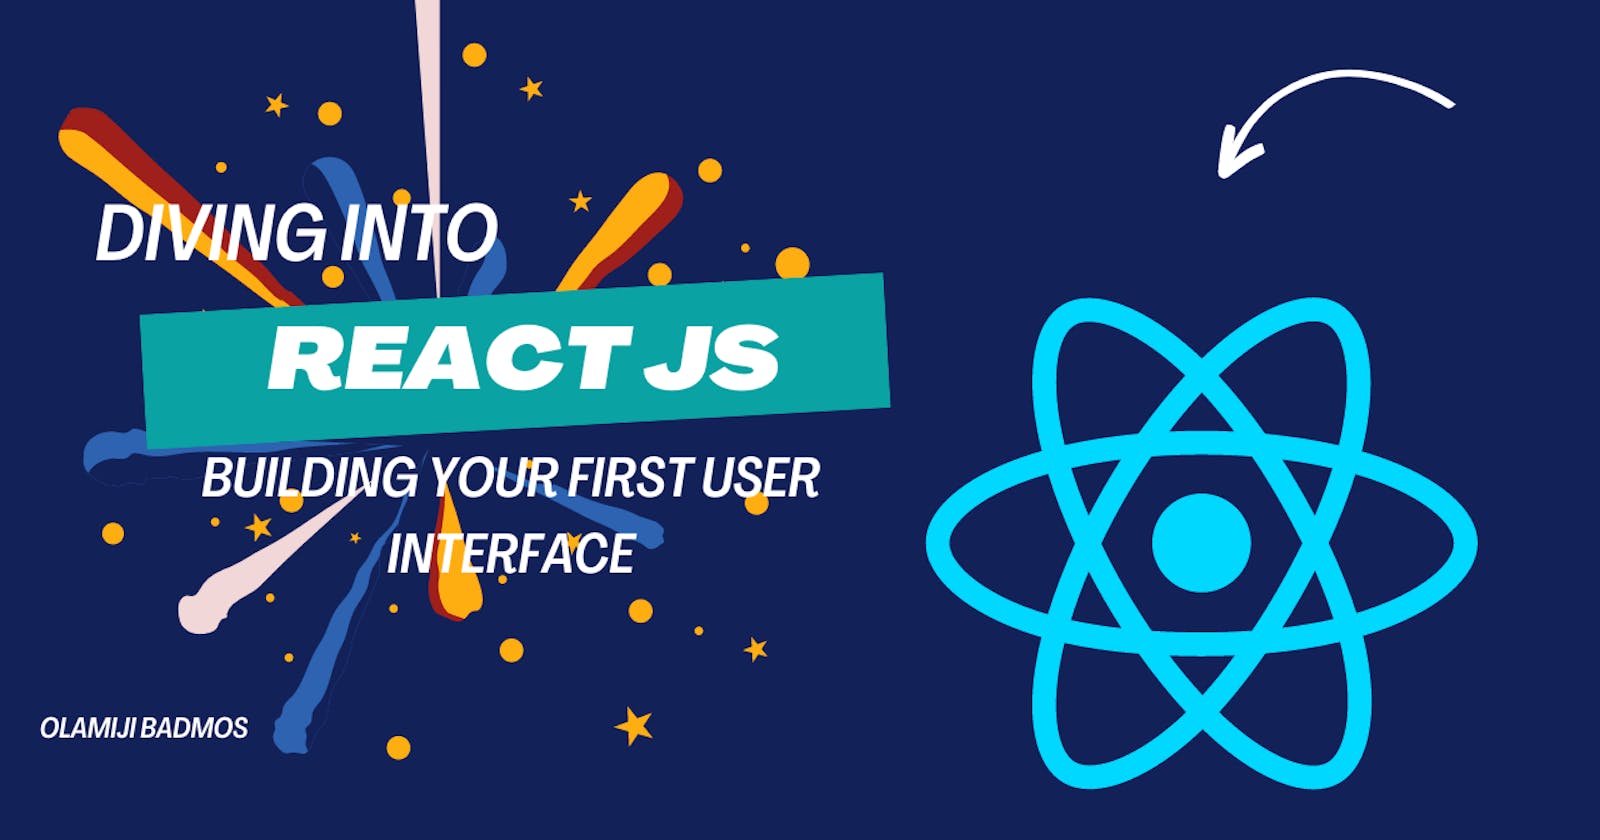 Diving into React: Building Your First User Interface